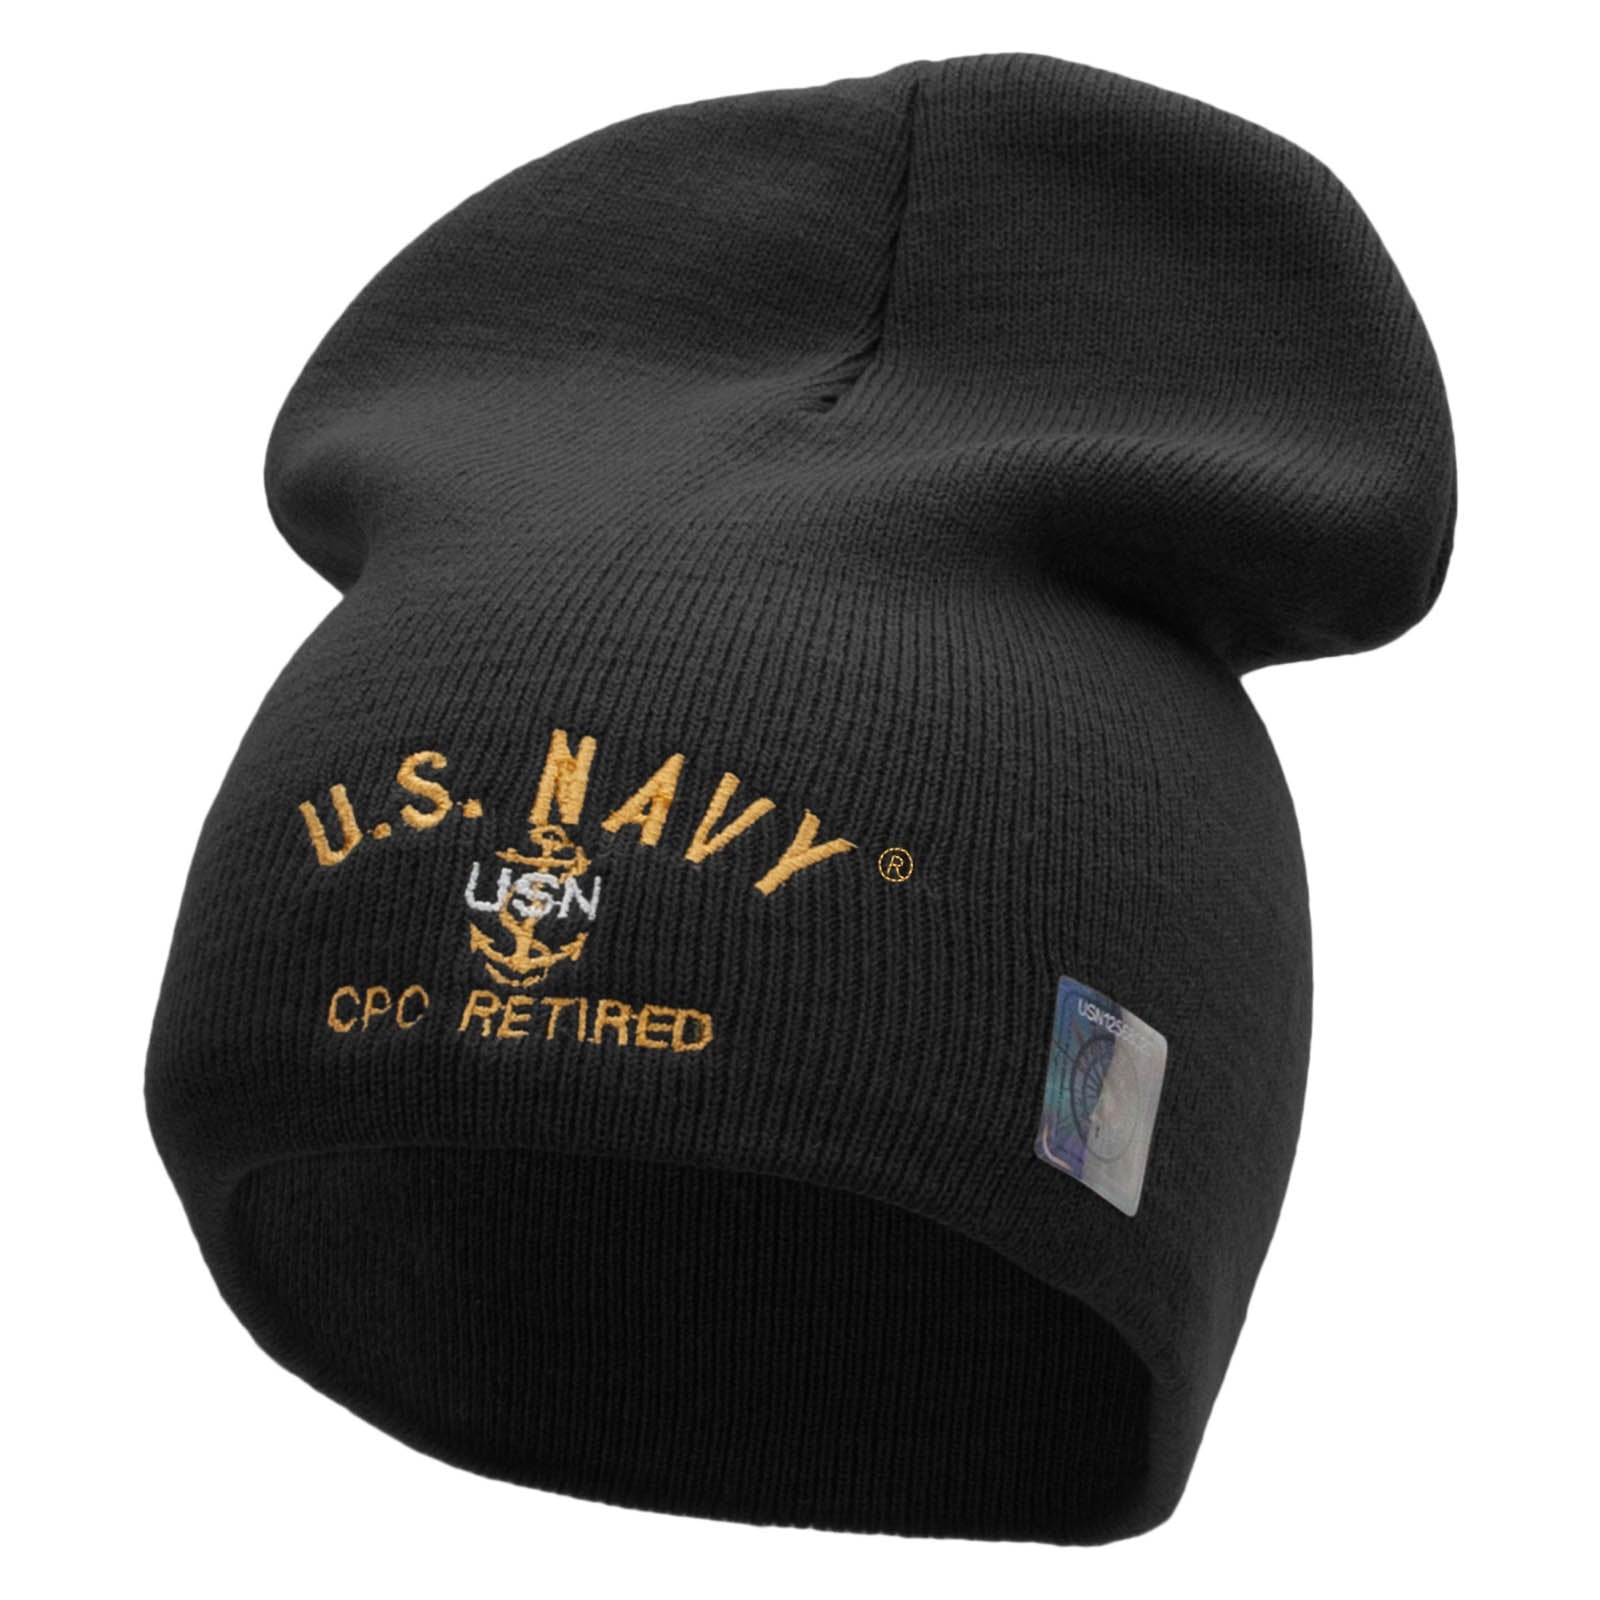 Licensed US Navy CPO Retired Embroidered Short Beanie Made in USA - Black OSFM